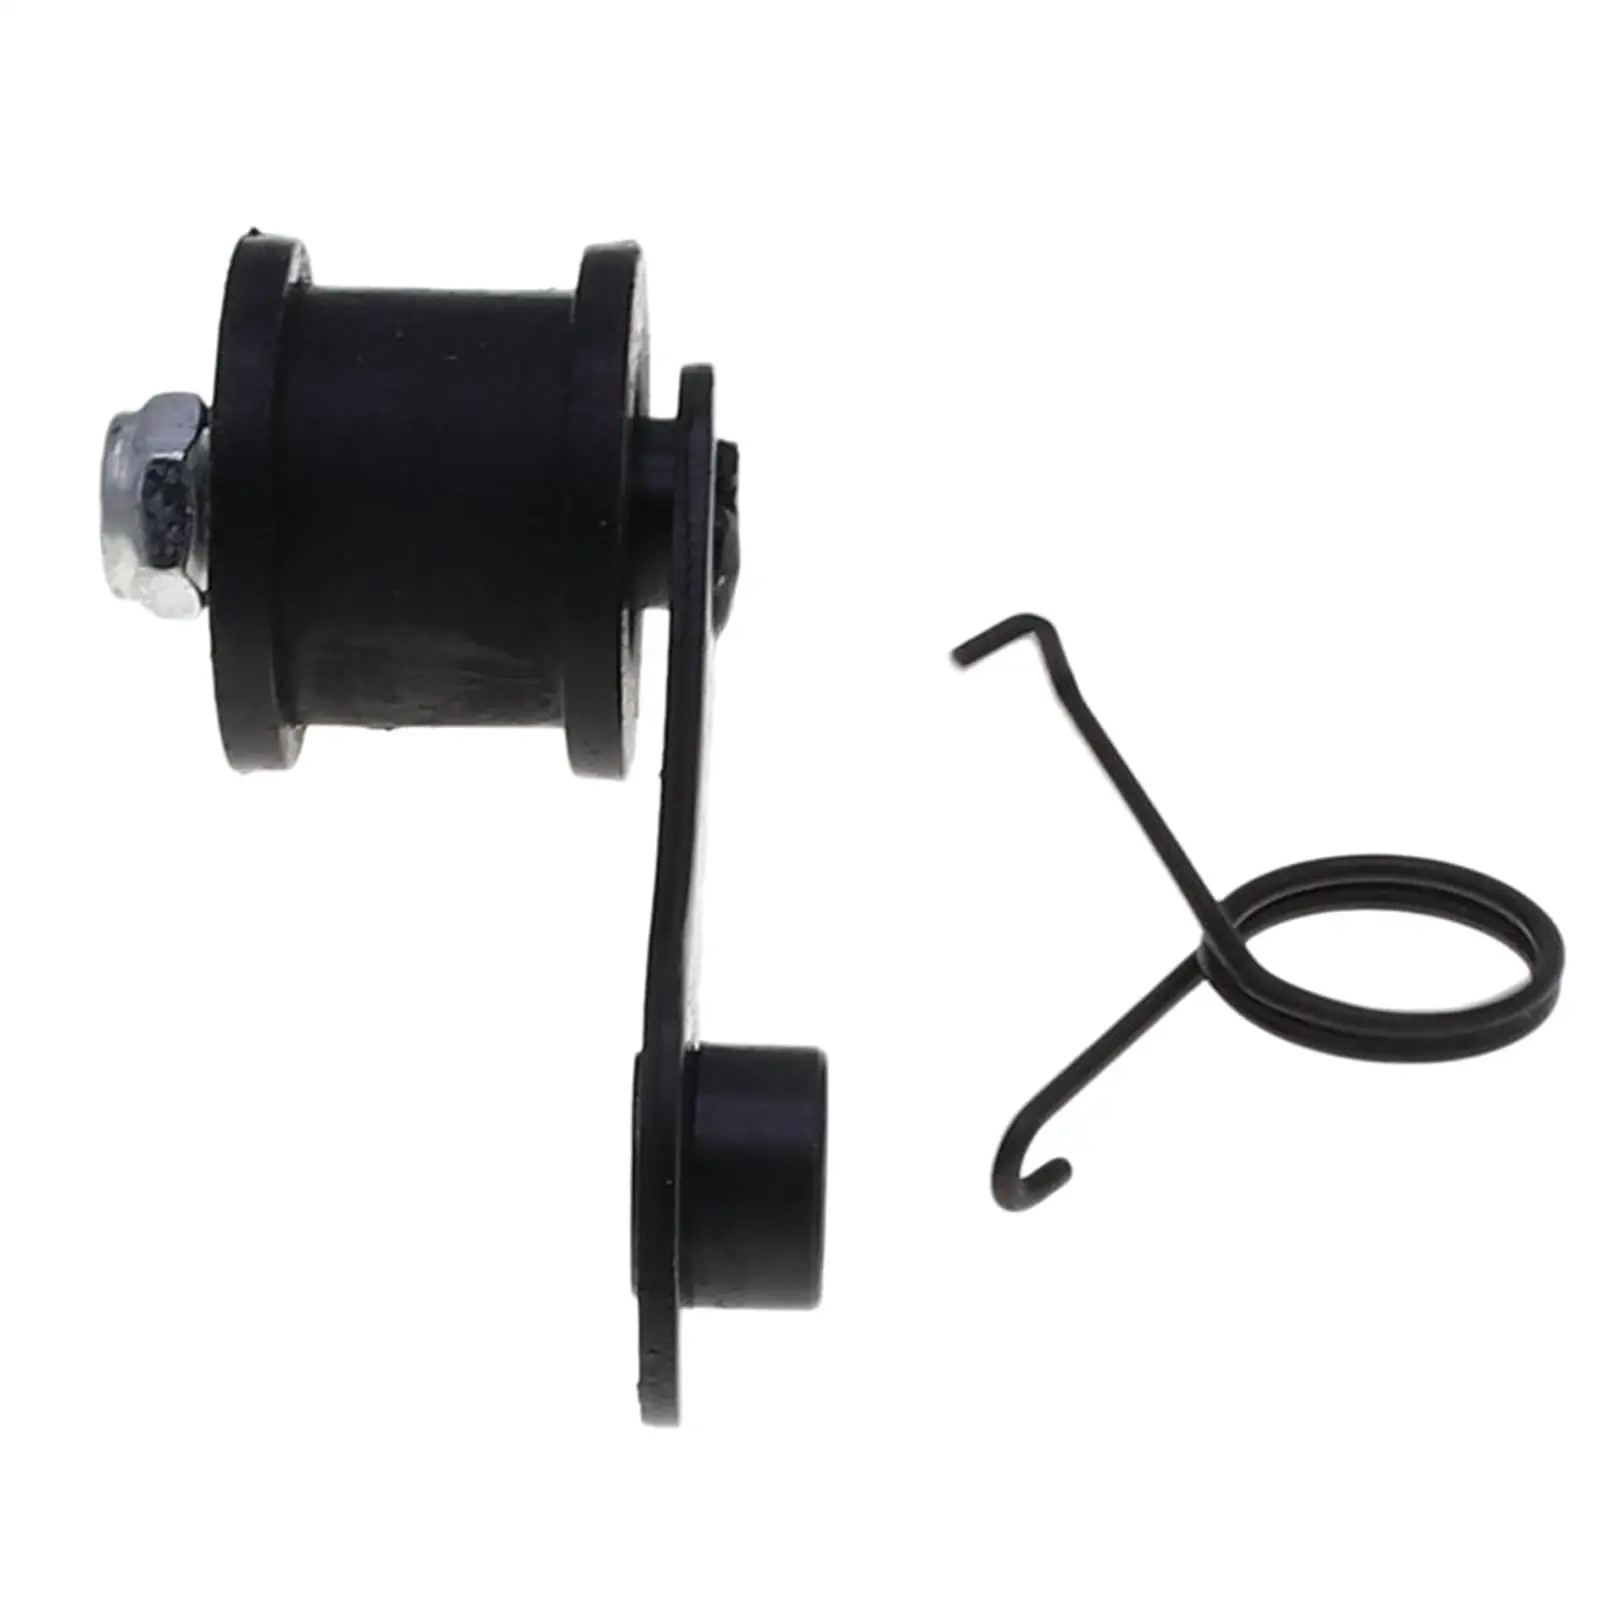 Chain Adjuster Tensioner with Spring for ATV Motorbike Quad Scooter